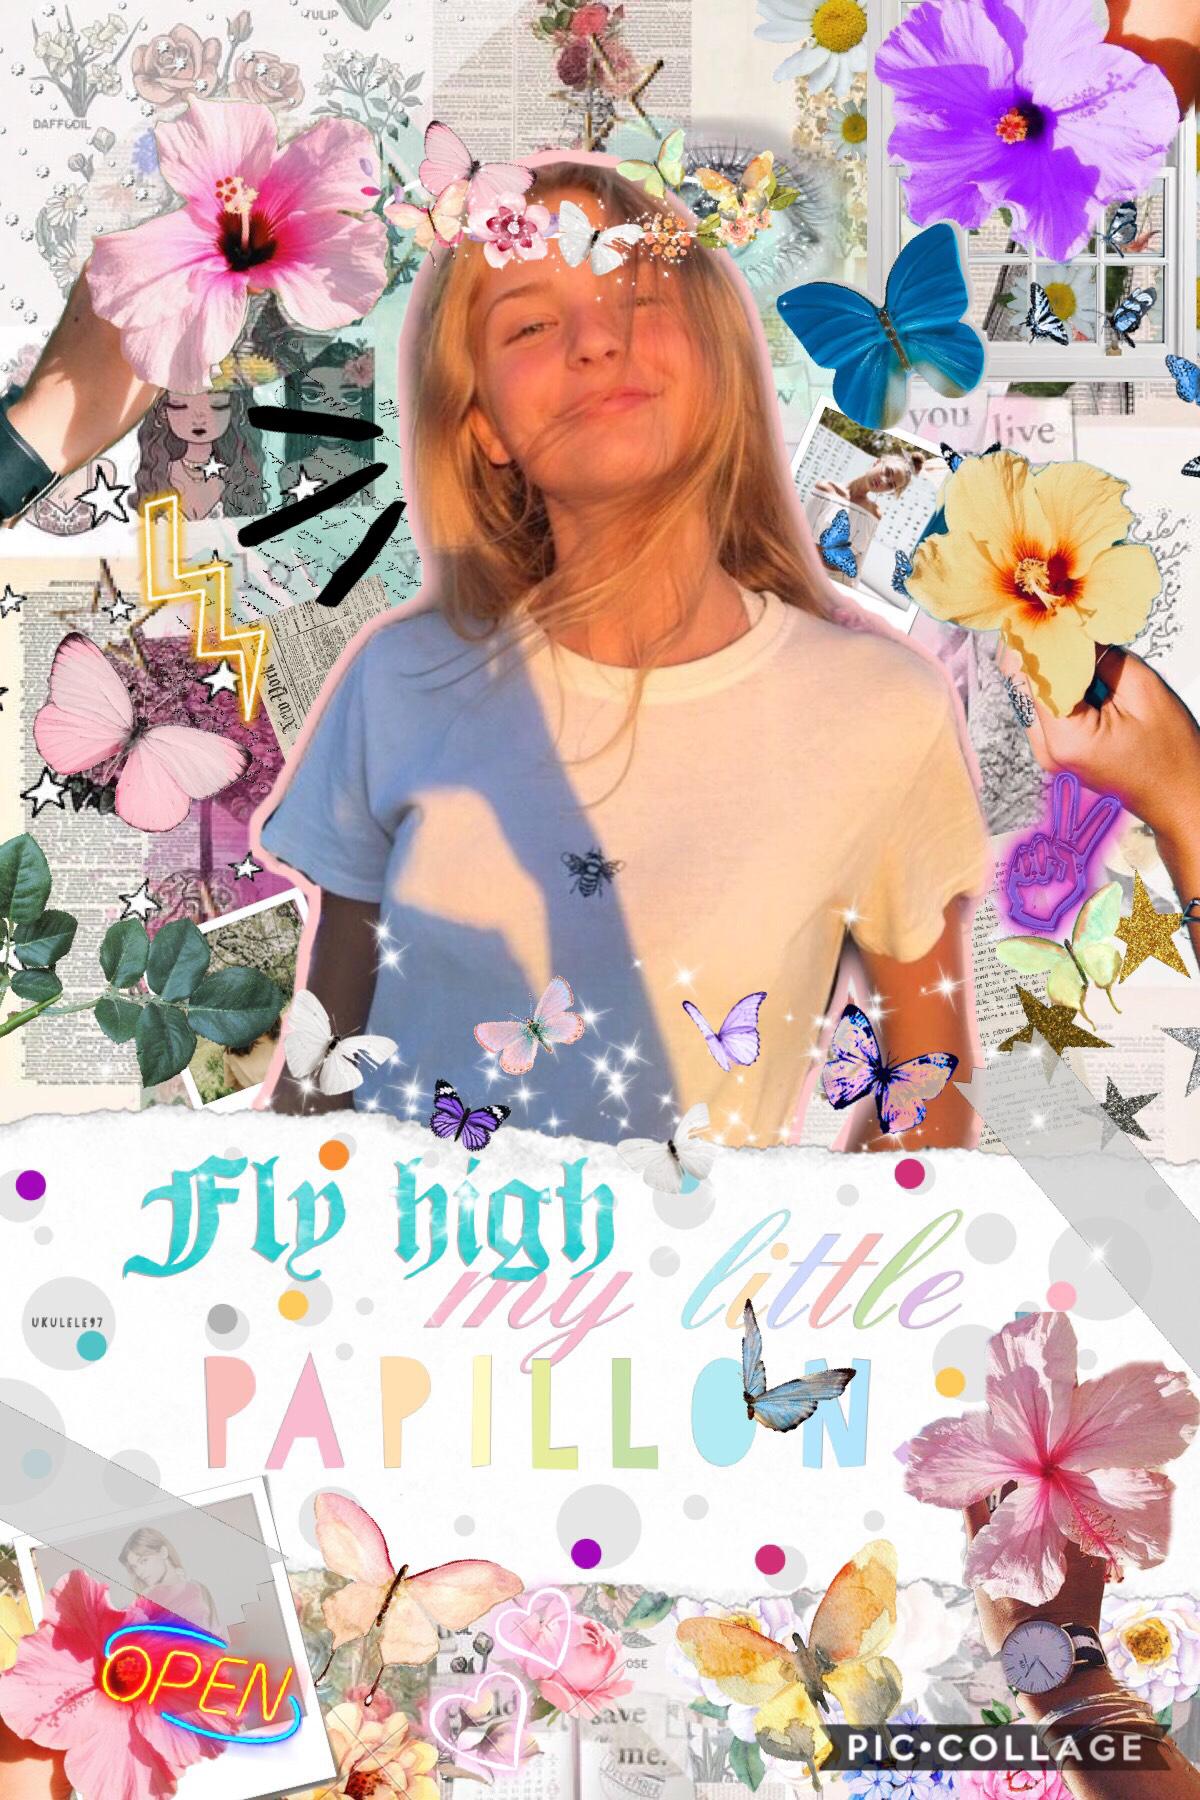 🦋✨Tappy✨🦋 2.24.19.

It’s a messy collage but I feel like it’s ok 👌🏼 papillon means butterfly 🦋 in French 🇫🇷 I hope you like dis ♥️ rate outa 10 ⭐️ QOTD: Have you ever caught a butterfly 🦋 before? AOTD: no ☹️ but at least I get to see them fly 